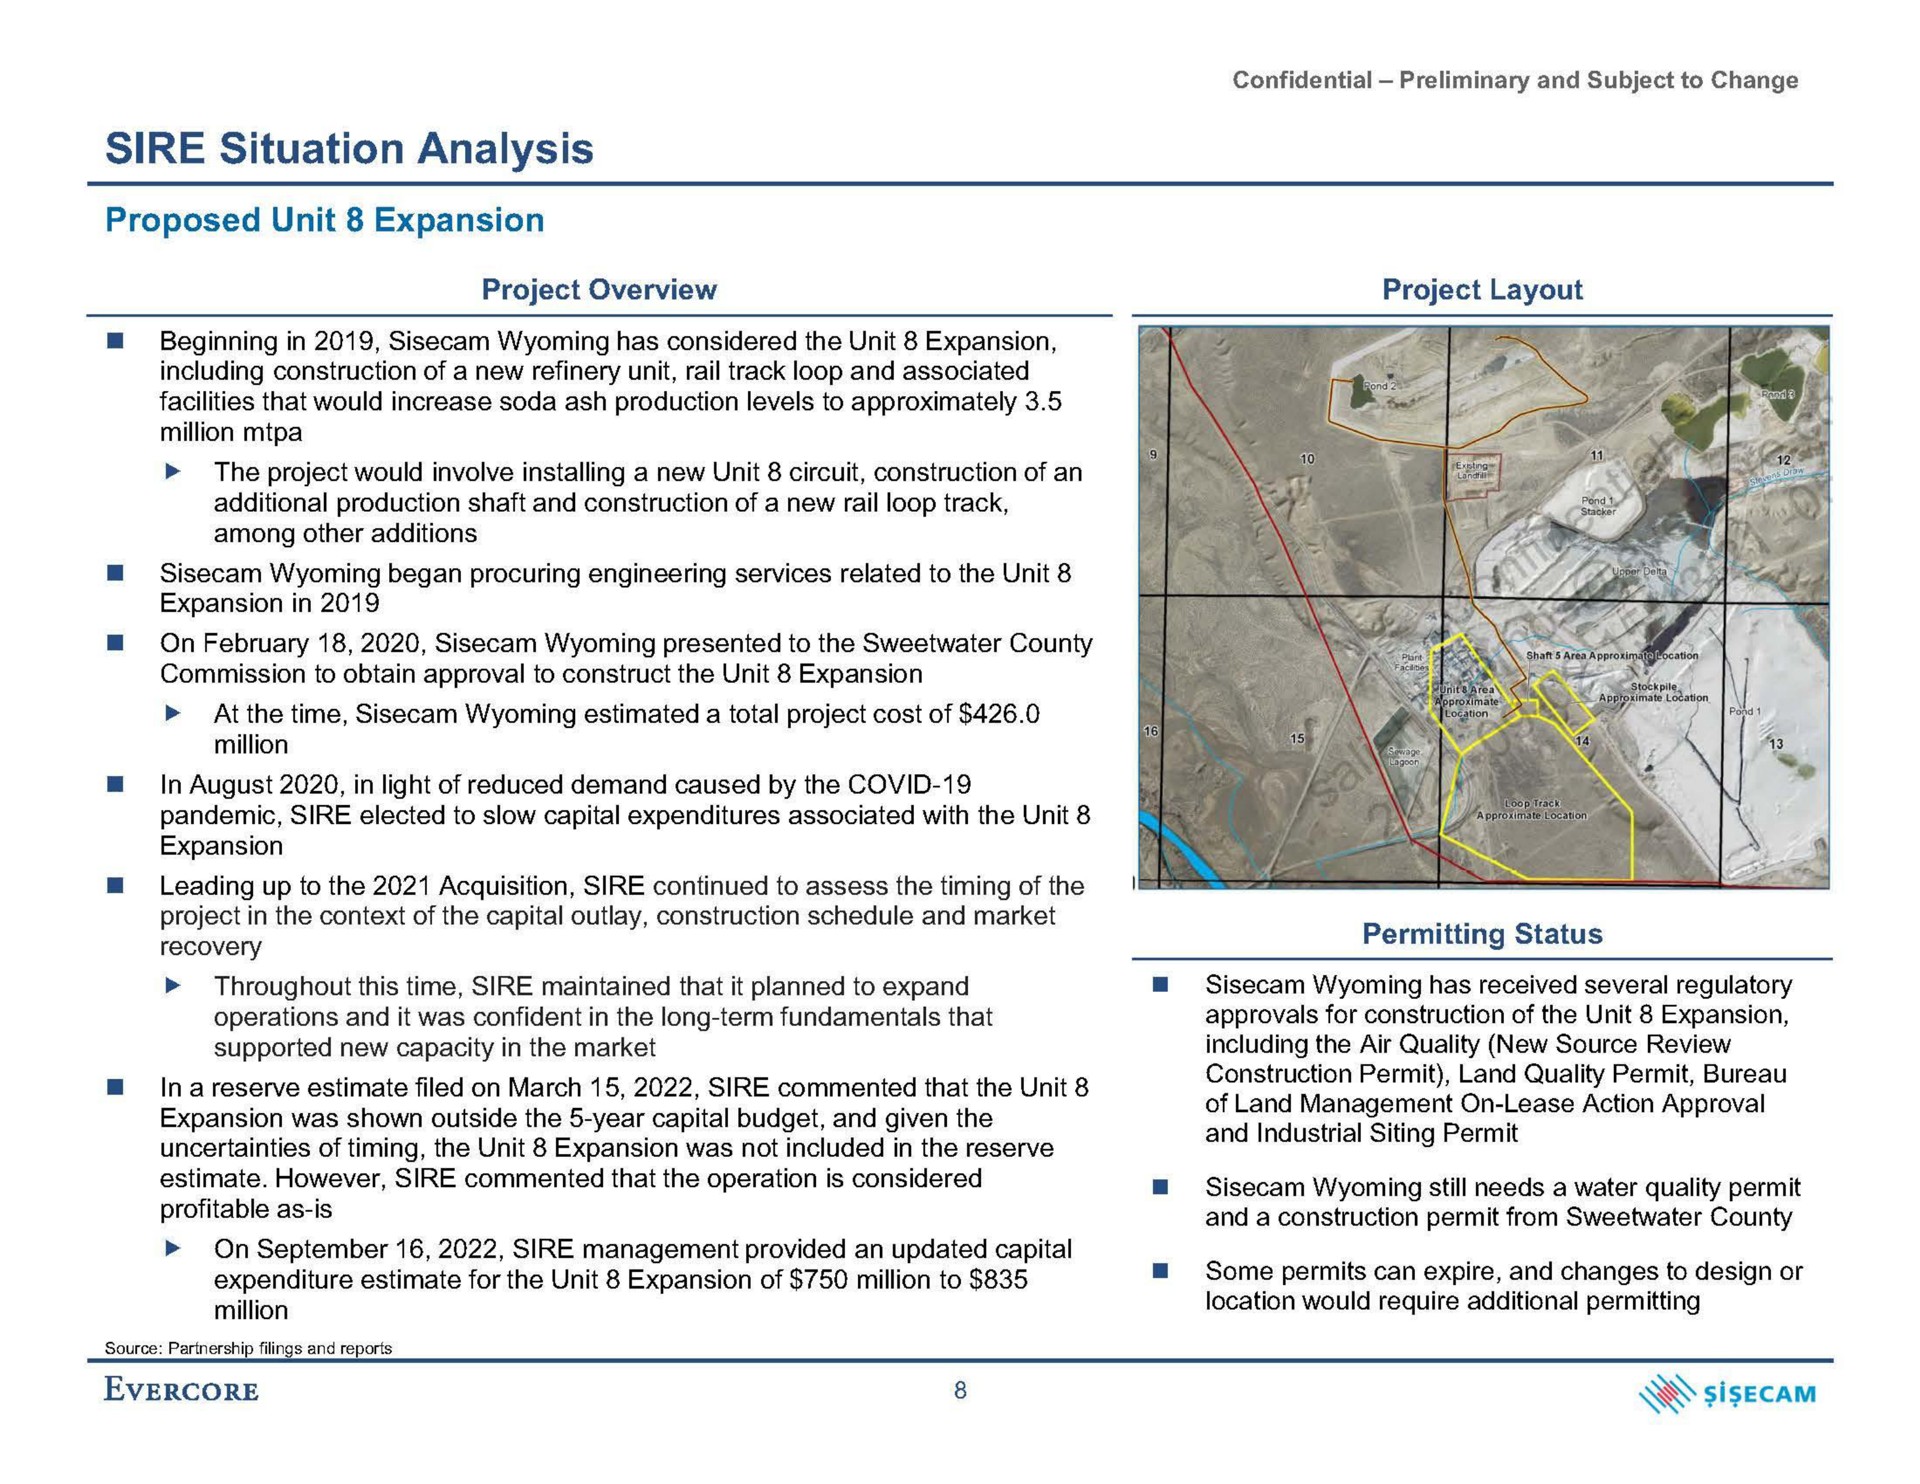 sire situation analysis proposed unit expansion profitable as is and a construction permit from sweetwater county | Evercore